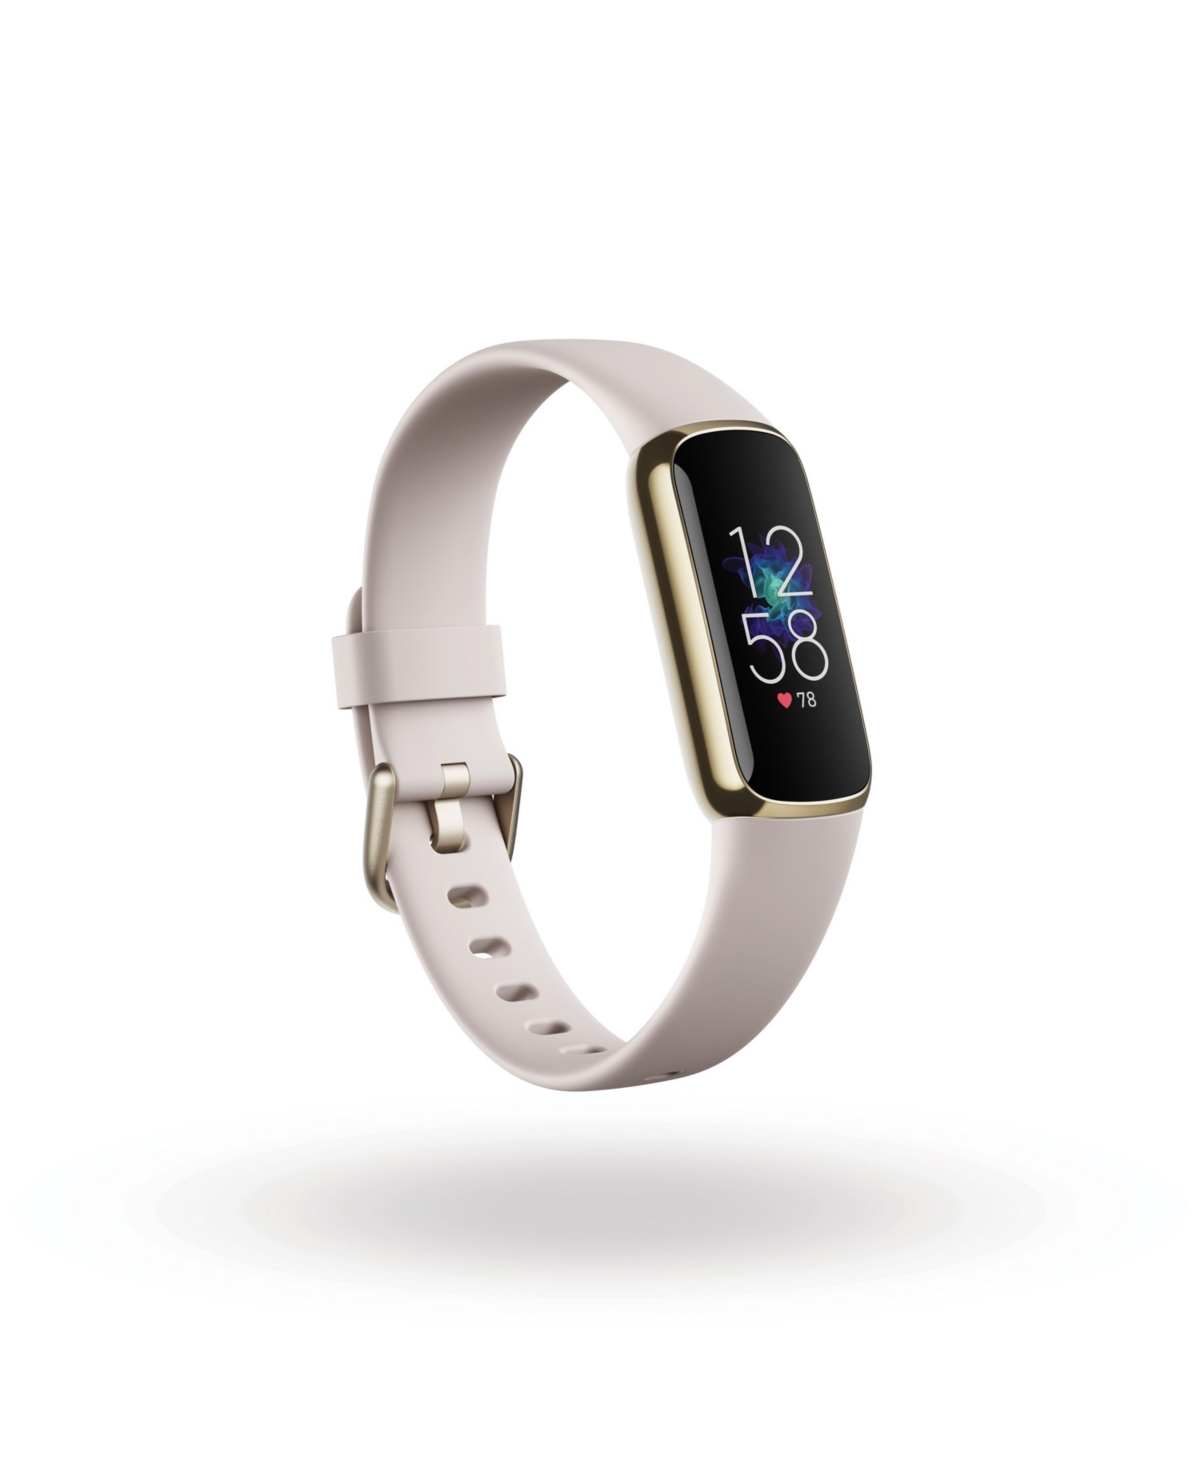 Fitbit Luxe Fitness Tracker in Soft Gold with Lunar White Wrist Band